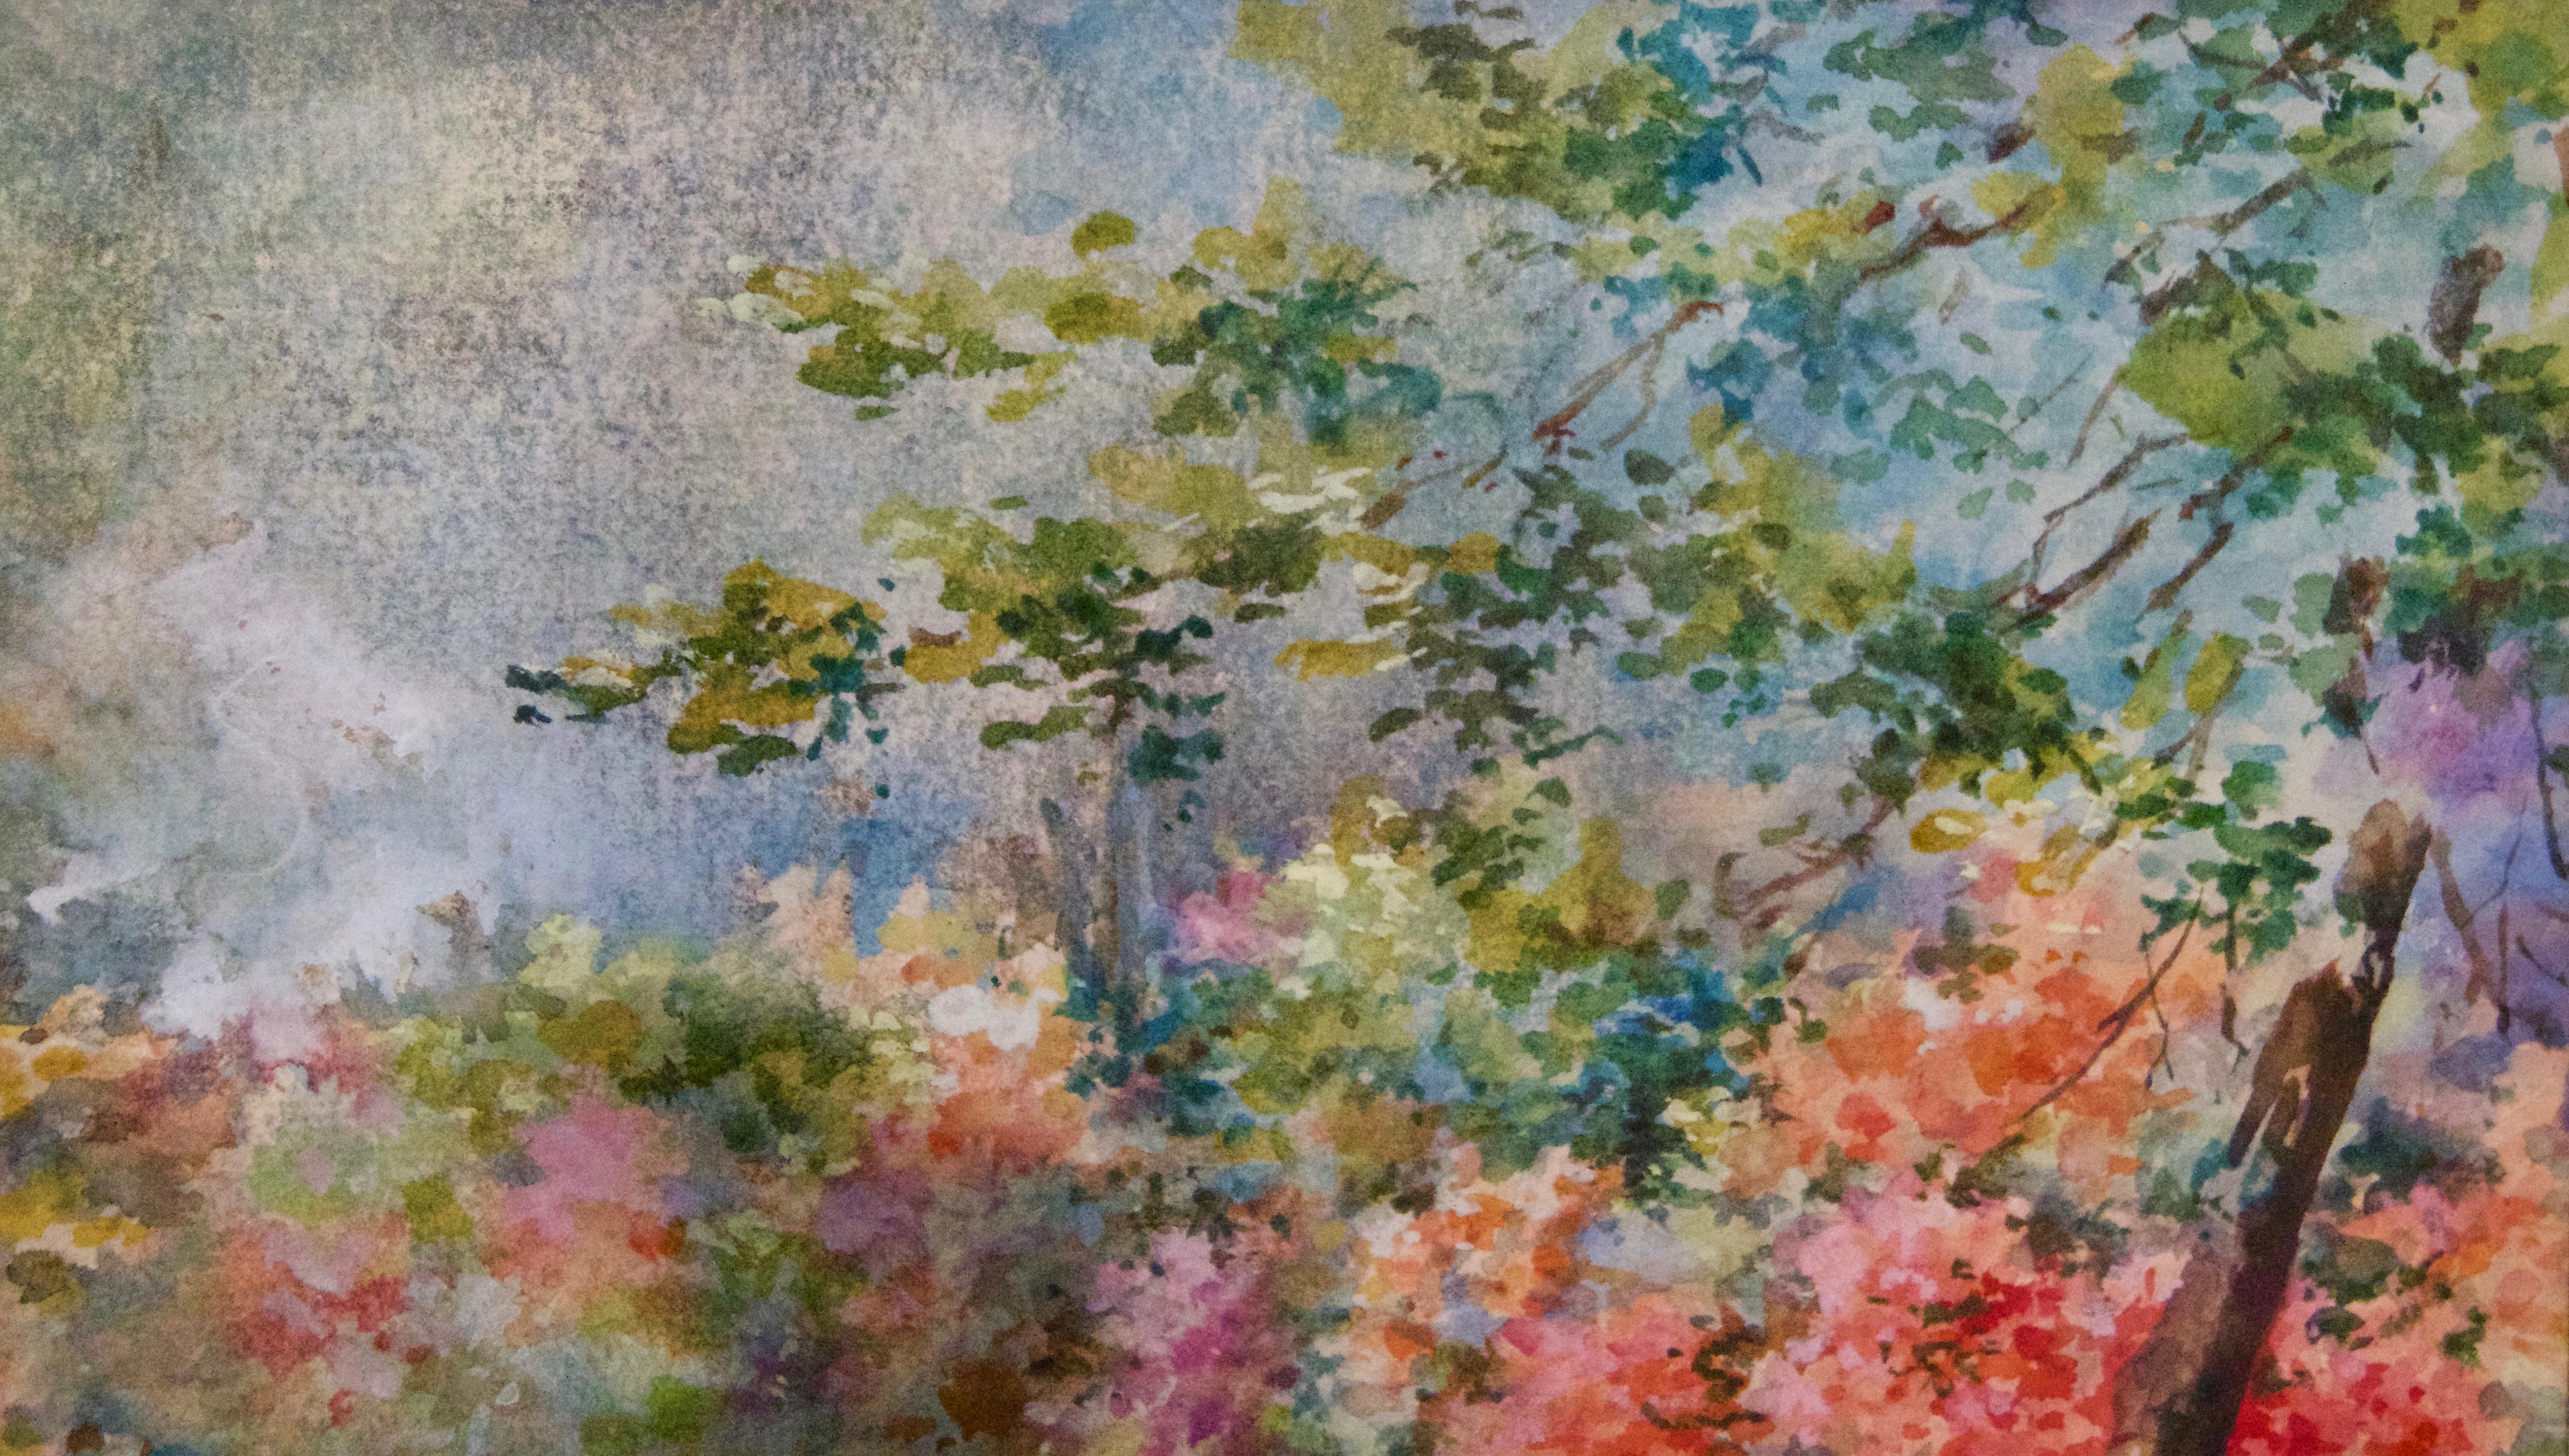 Floral Gardens - Early 20th Century Watercolor Landscape by Annie L Pressland For Sale 3